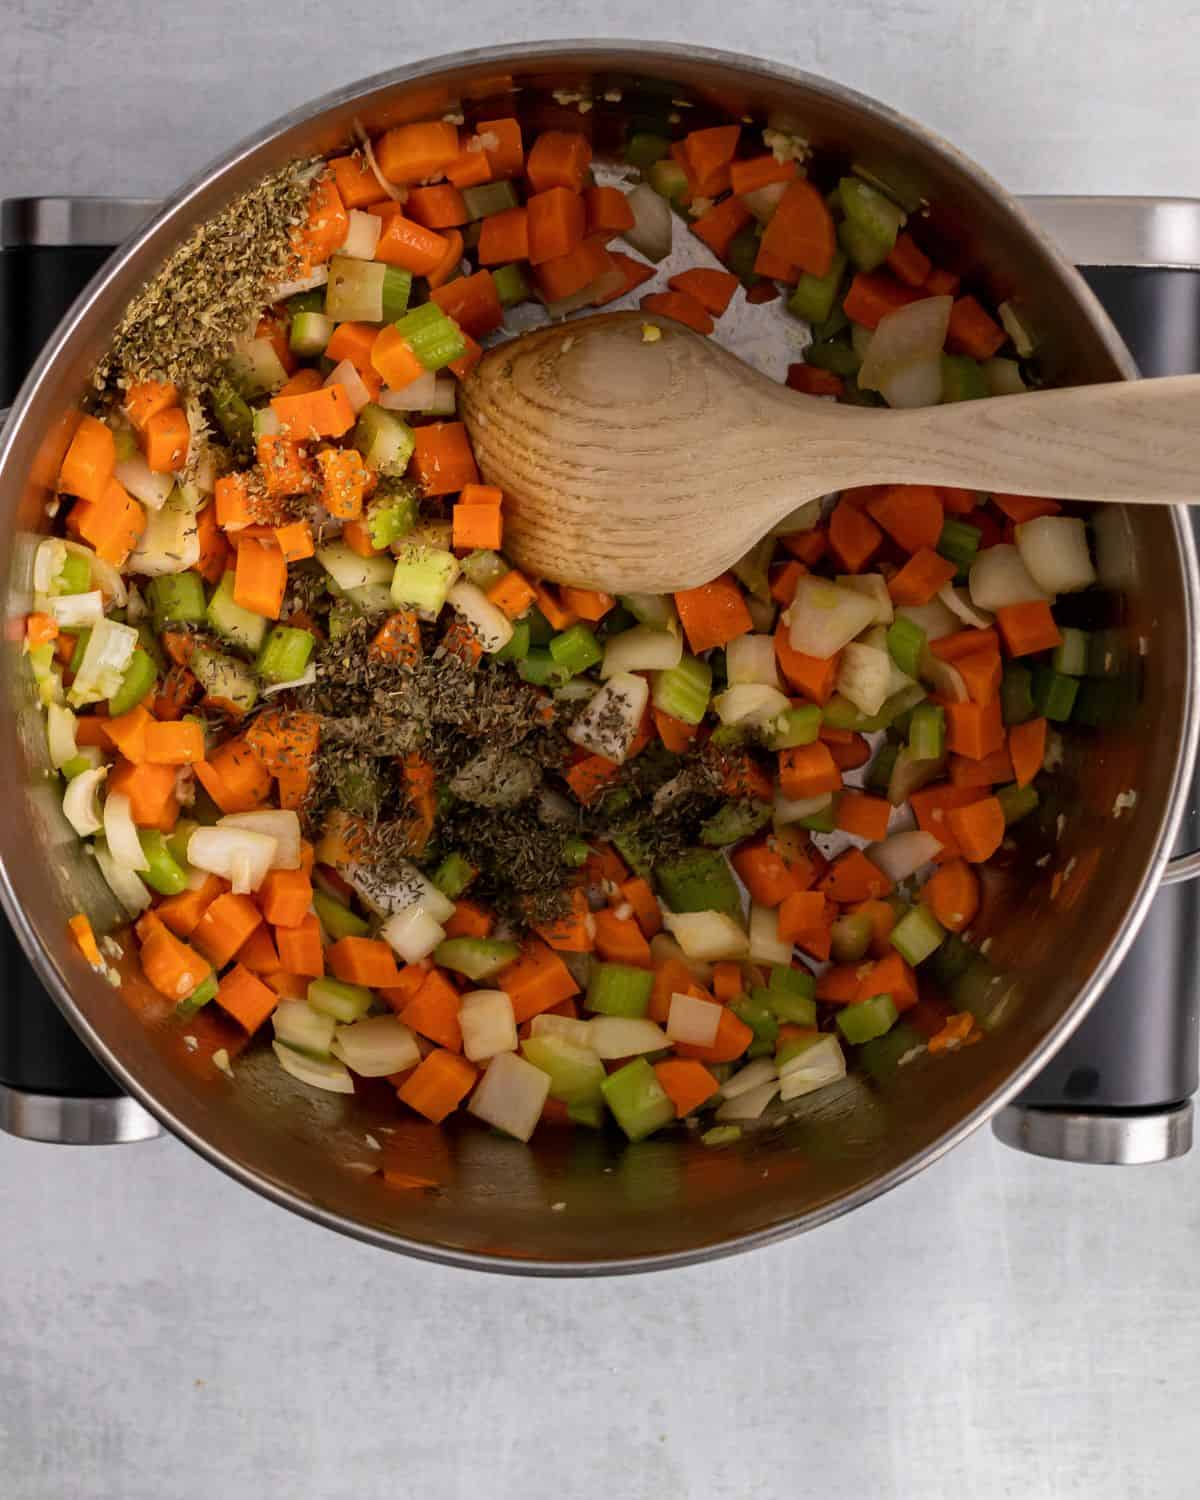 seasoning in with cooked vegetables.